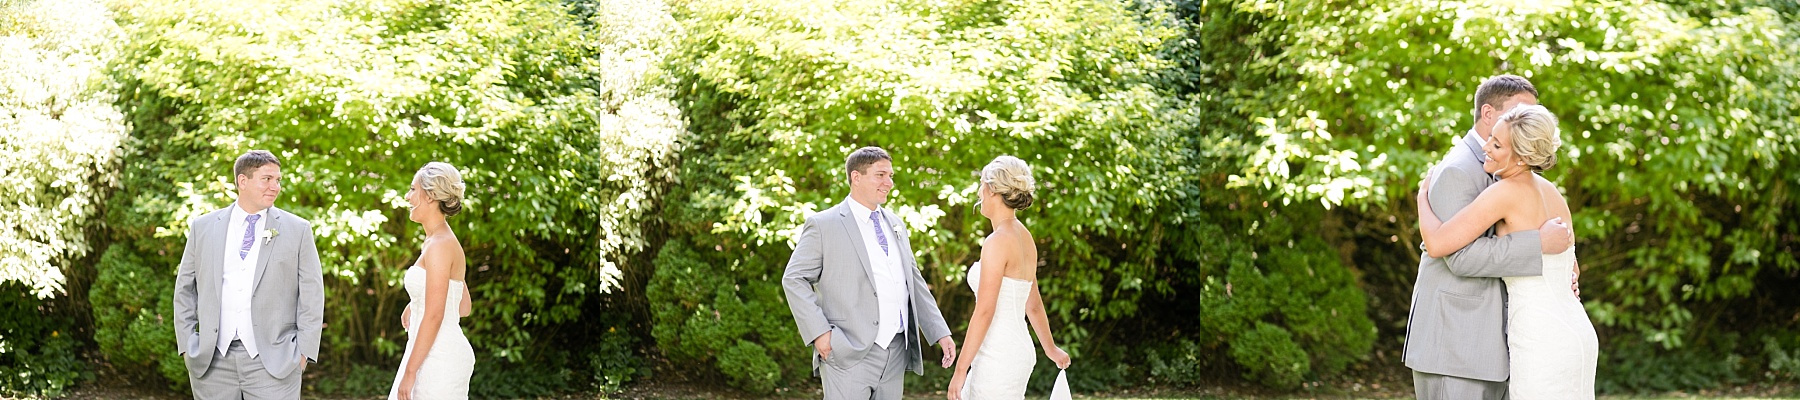 A summer garden fete for a pair of lovebirds. Sarah & Kyle were married at the Florian Gardens in Eau Claire.